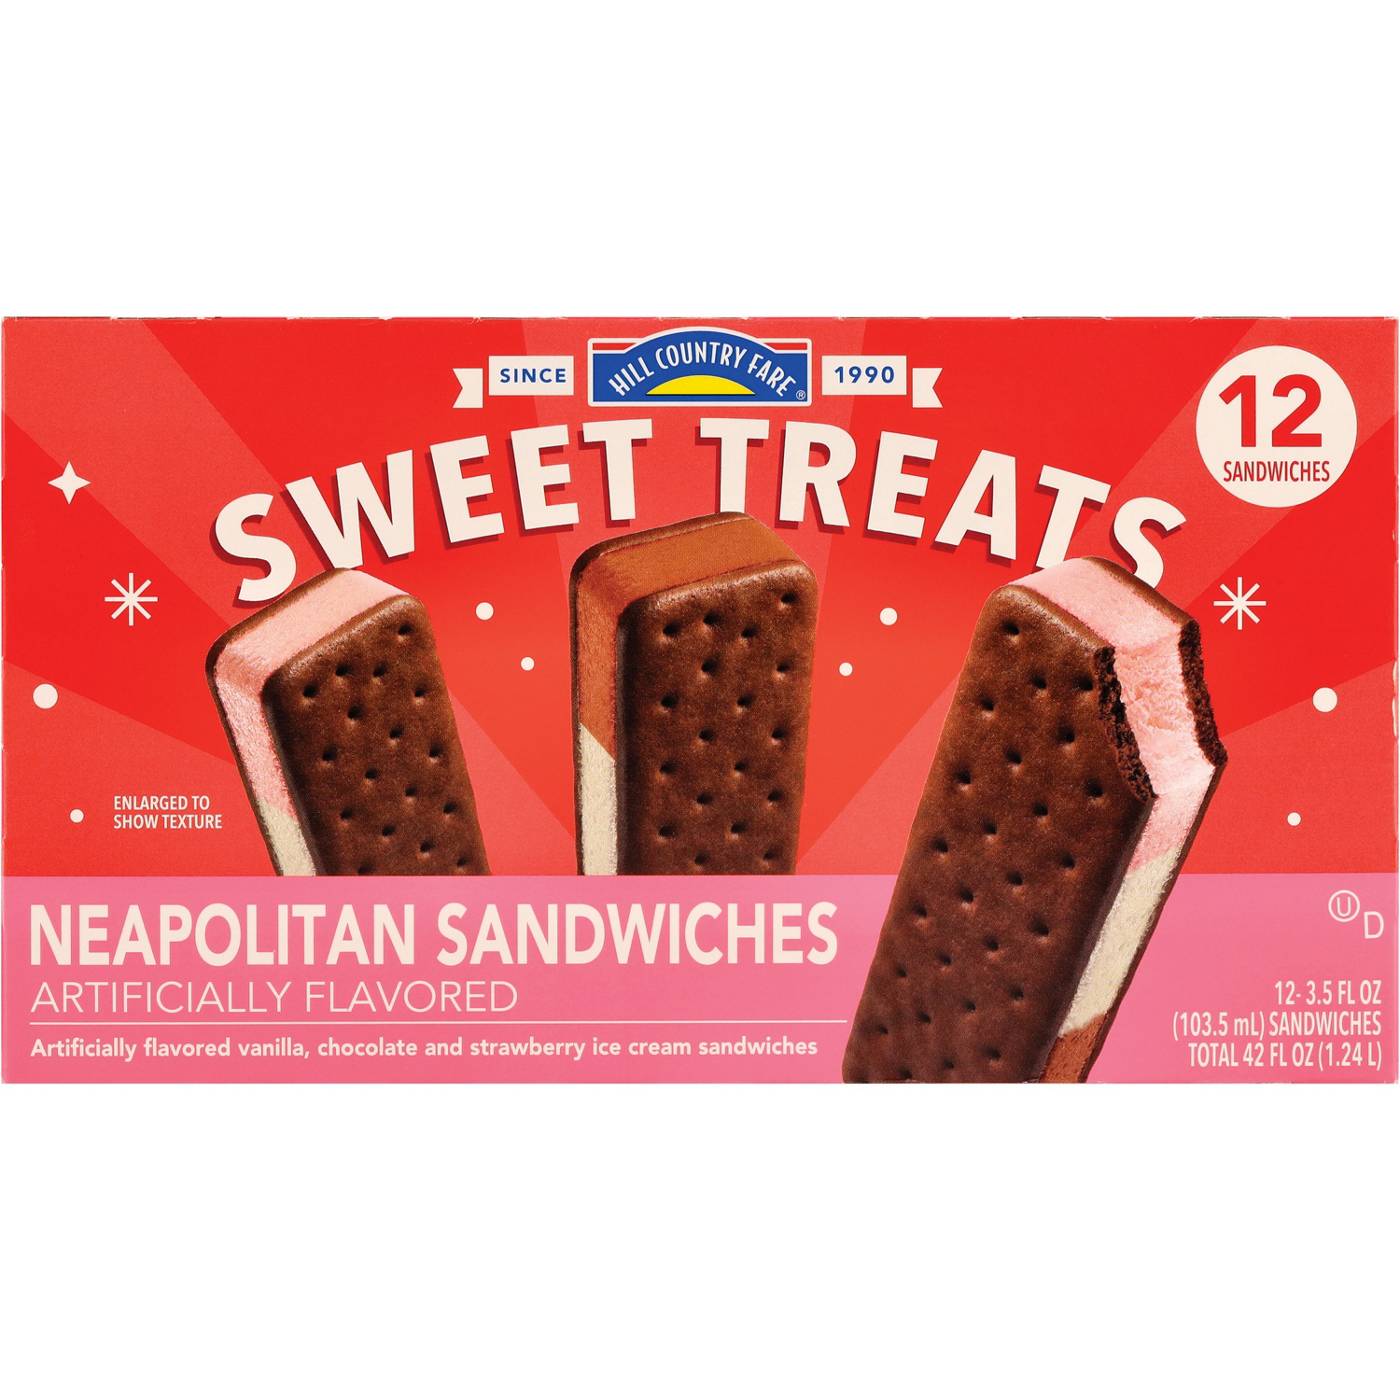 Hill Country Fare Sweet Treats Neapolitan Ice Cream Sandwiches; image 1 of 2